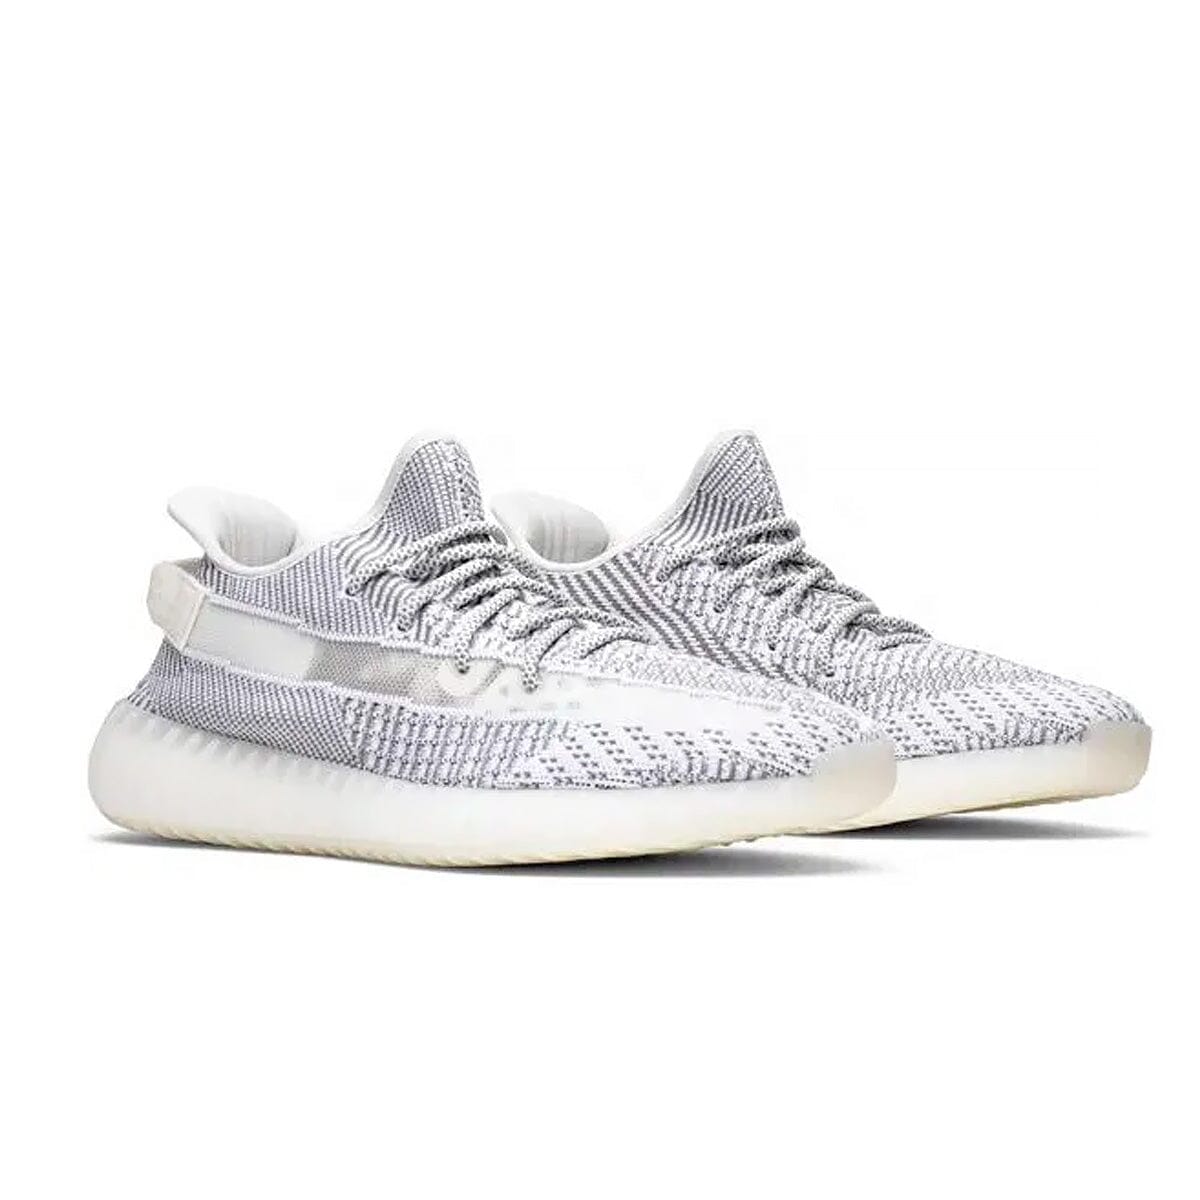 Adidas Yeezy Boost 350 V2 Static (Non-Reflective) Yeezy Blizz Sneakers 